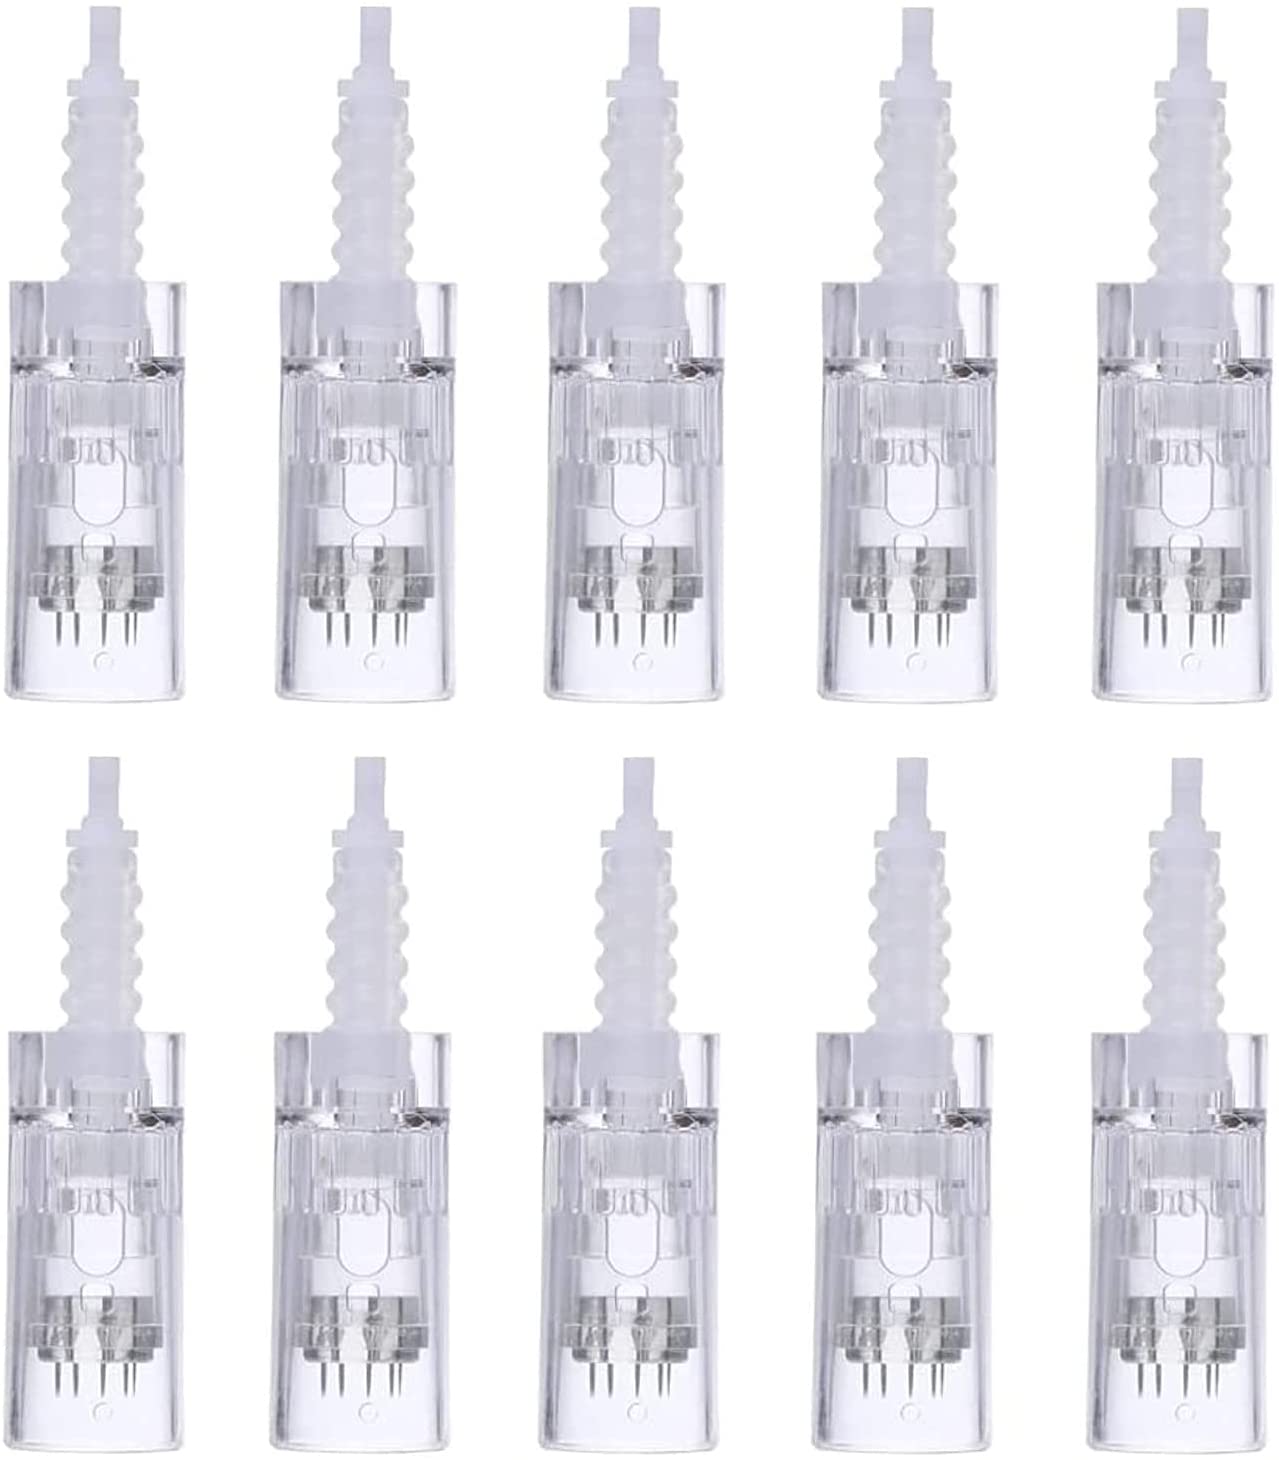 P-Beauty Cosmetic Accessories Nano Needle Cartridges Replacement Needle Cartridges for Car Derma Electric Pen Microneedling Bayonet Clasp for Dermapen Devices with Bayonet Port Pack of 10 (Nano)